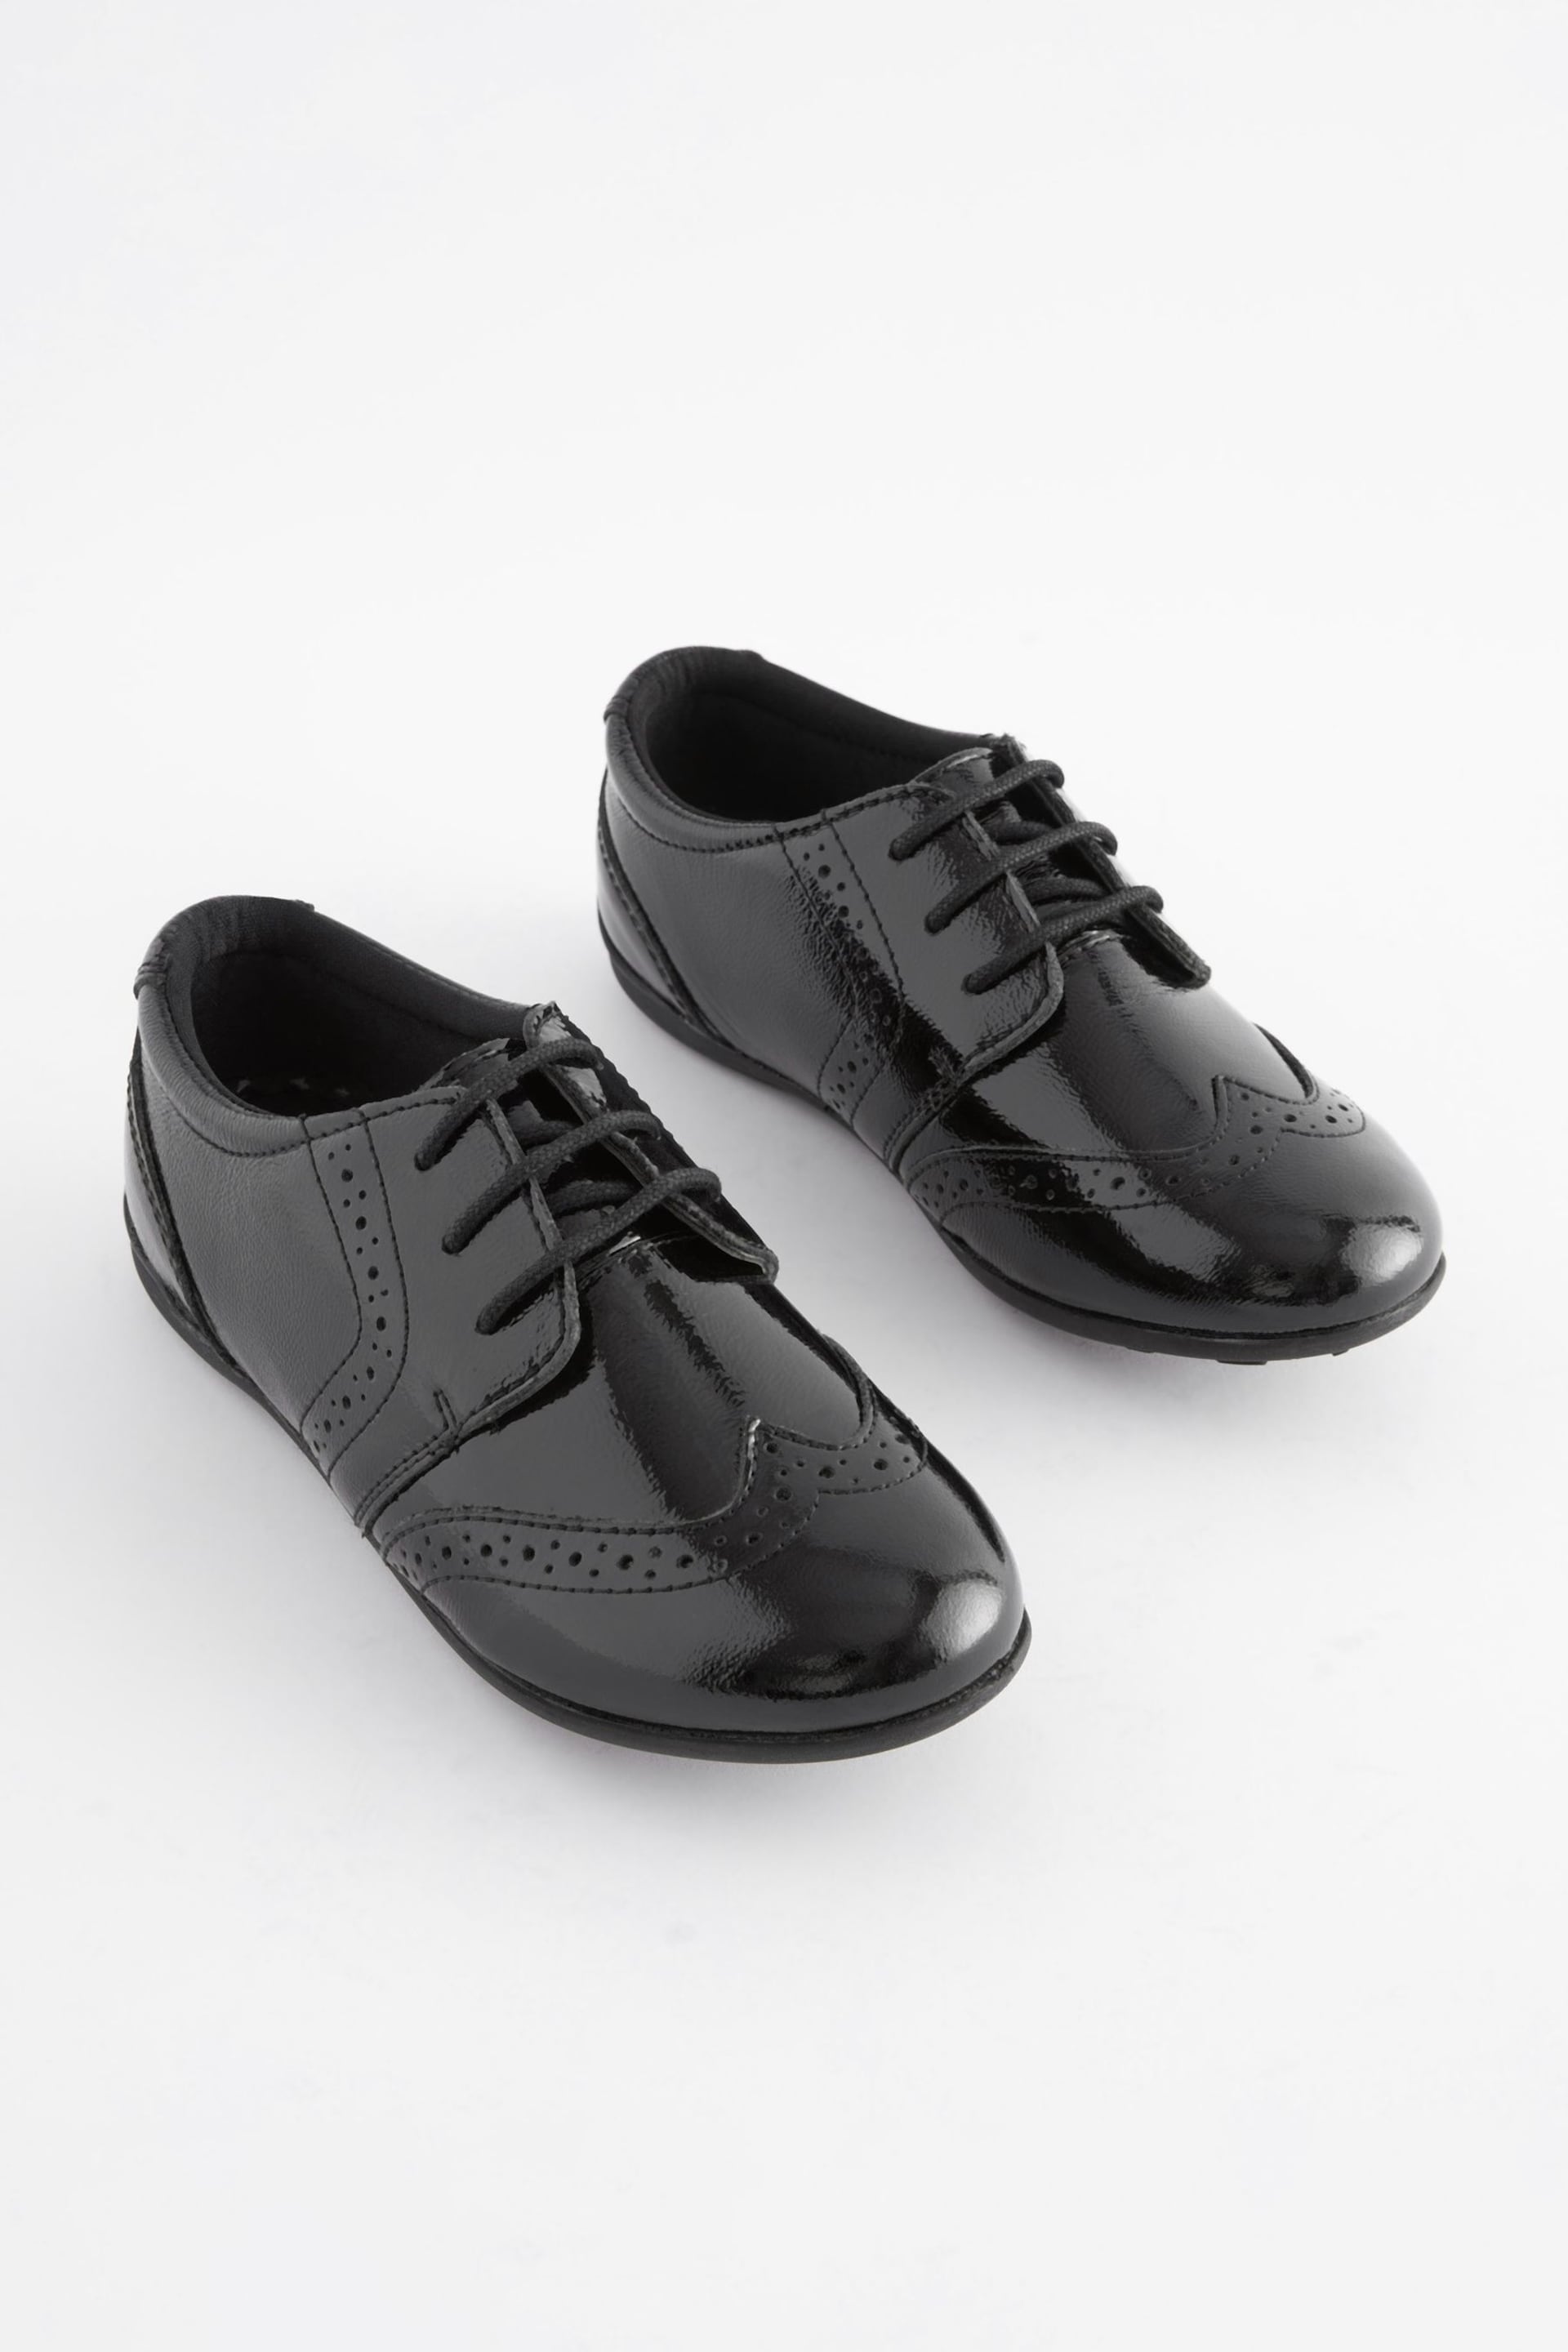 Black Patent Standard Fit (F) School Leather Lace-Up Brogues - Image 1 of 10